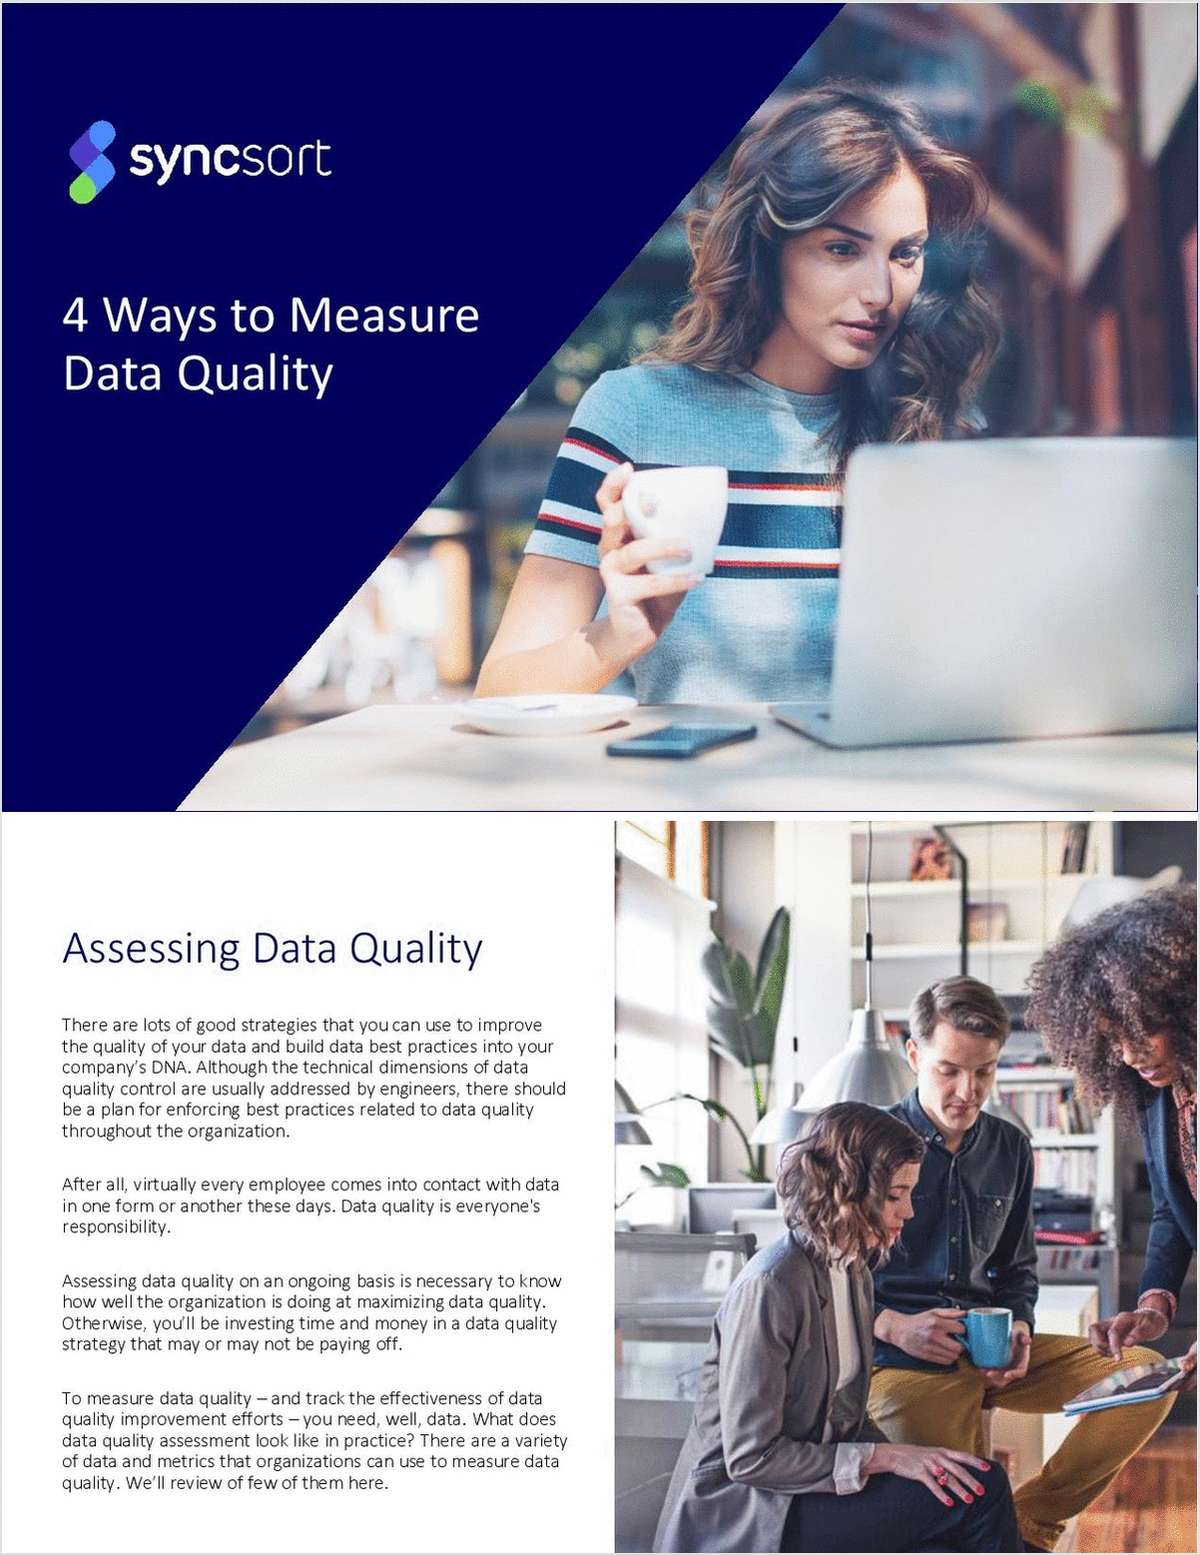 Discover 4 Ways to Measure Data Quality